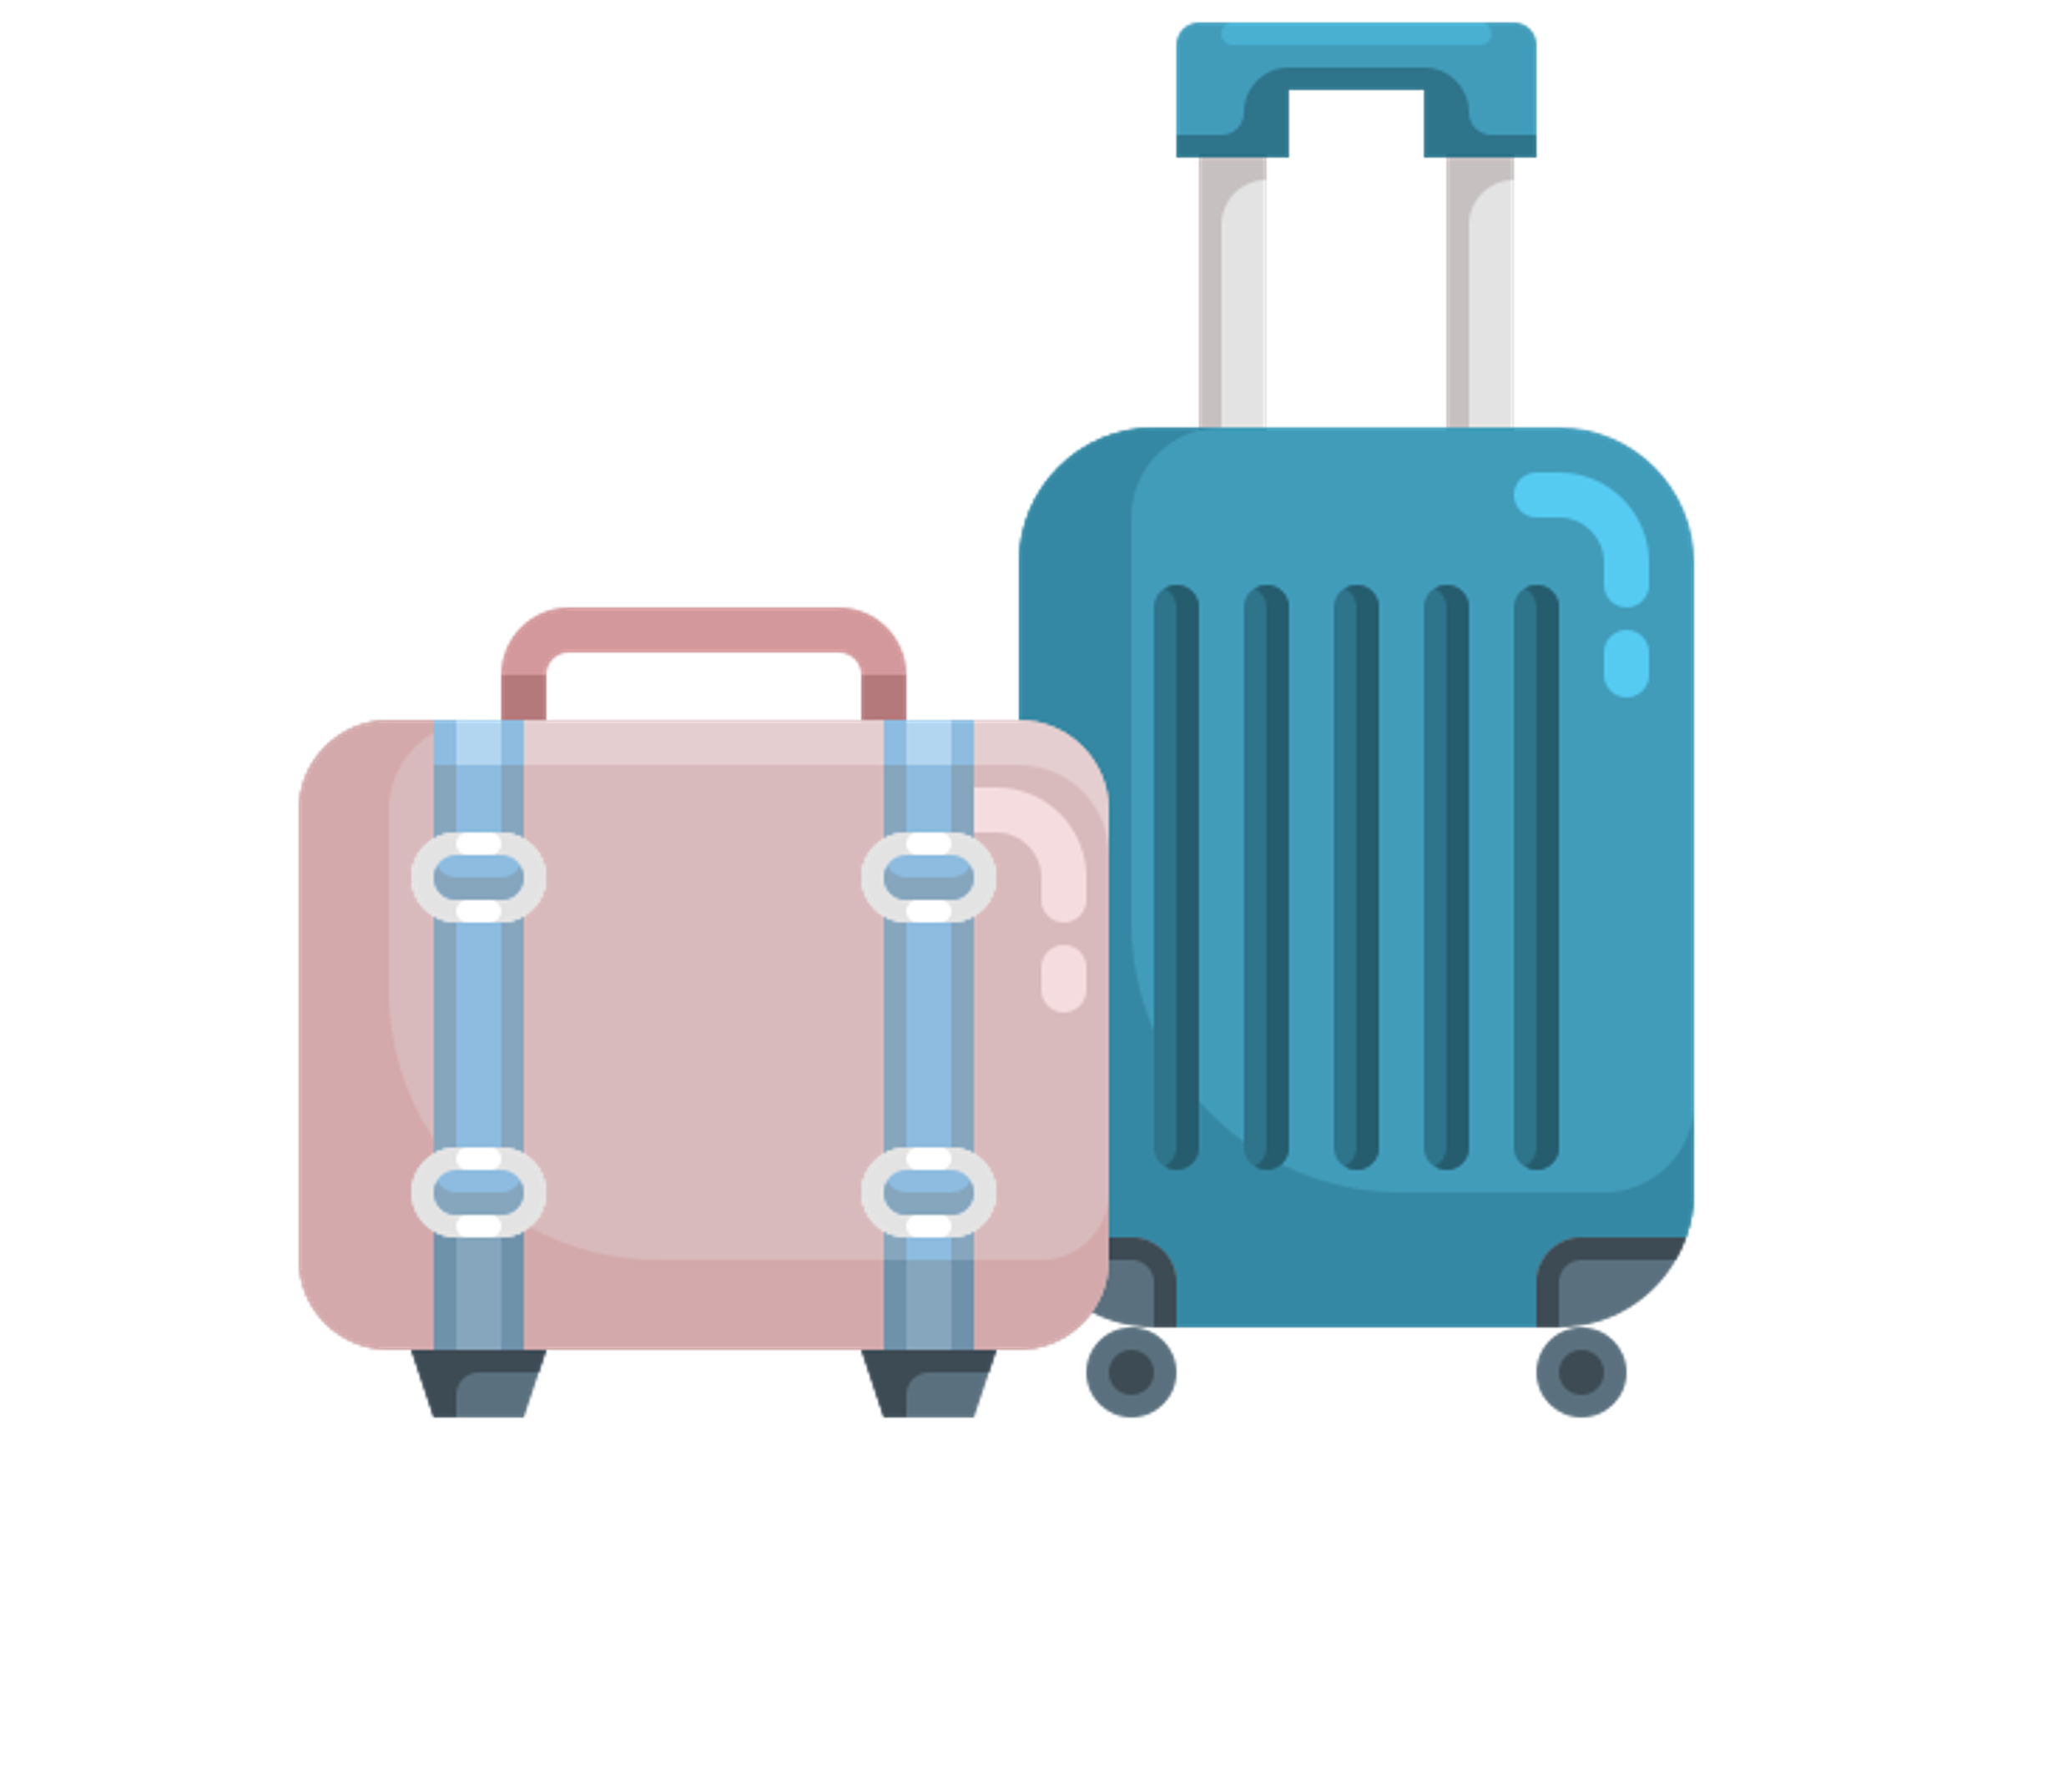 images/icones/module_icones/TravelIconRow.png#joomlaImage://local-images/icones/module_icones/TravelIconRow.png?width=2453&height=2148